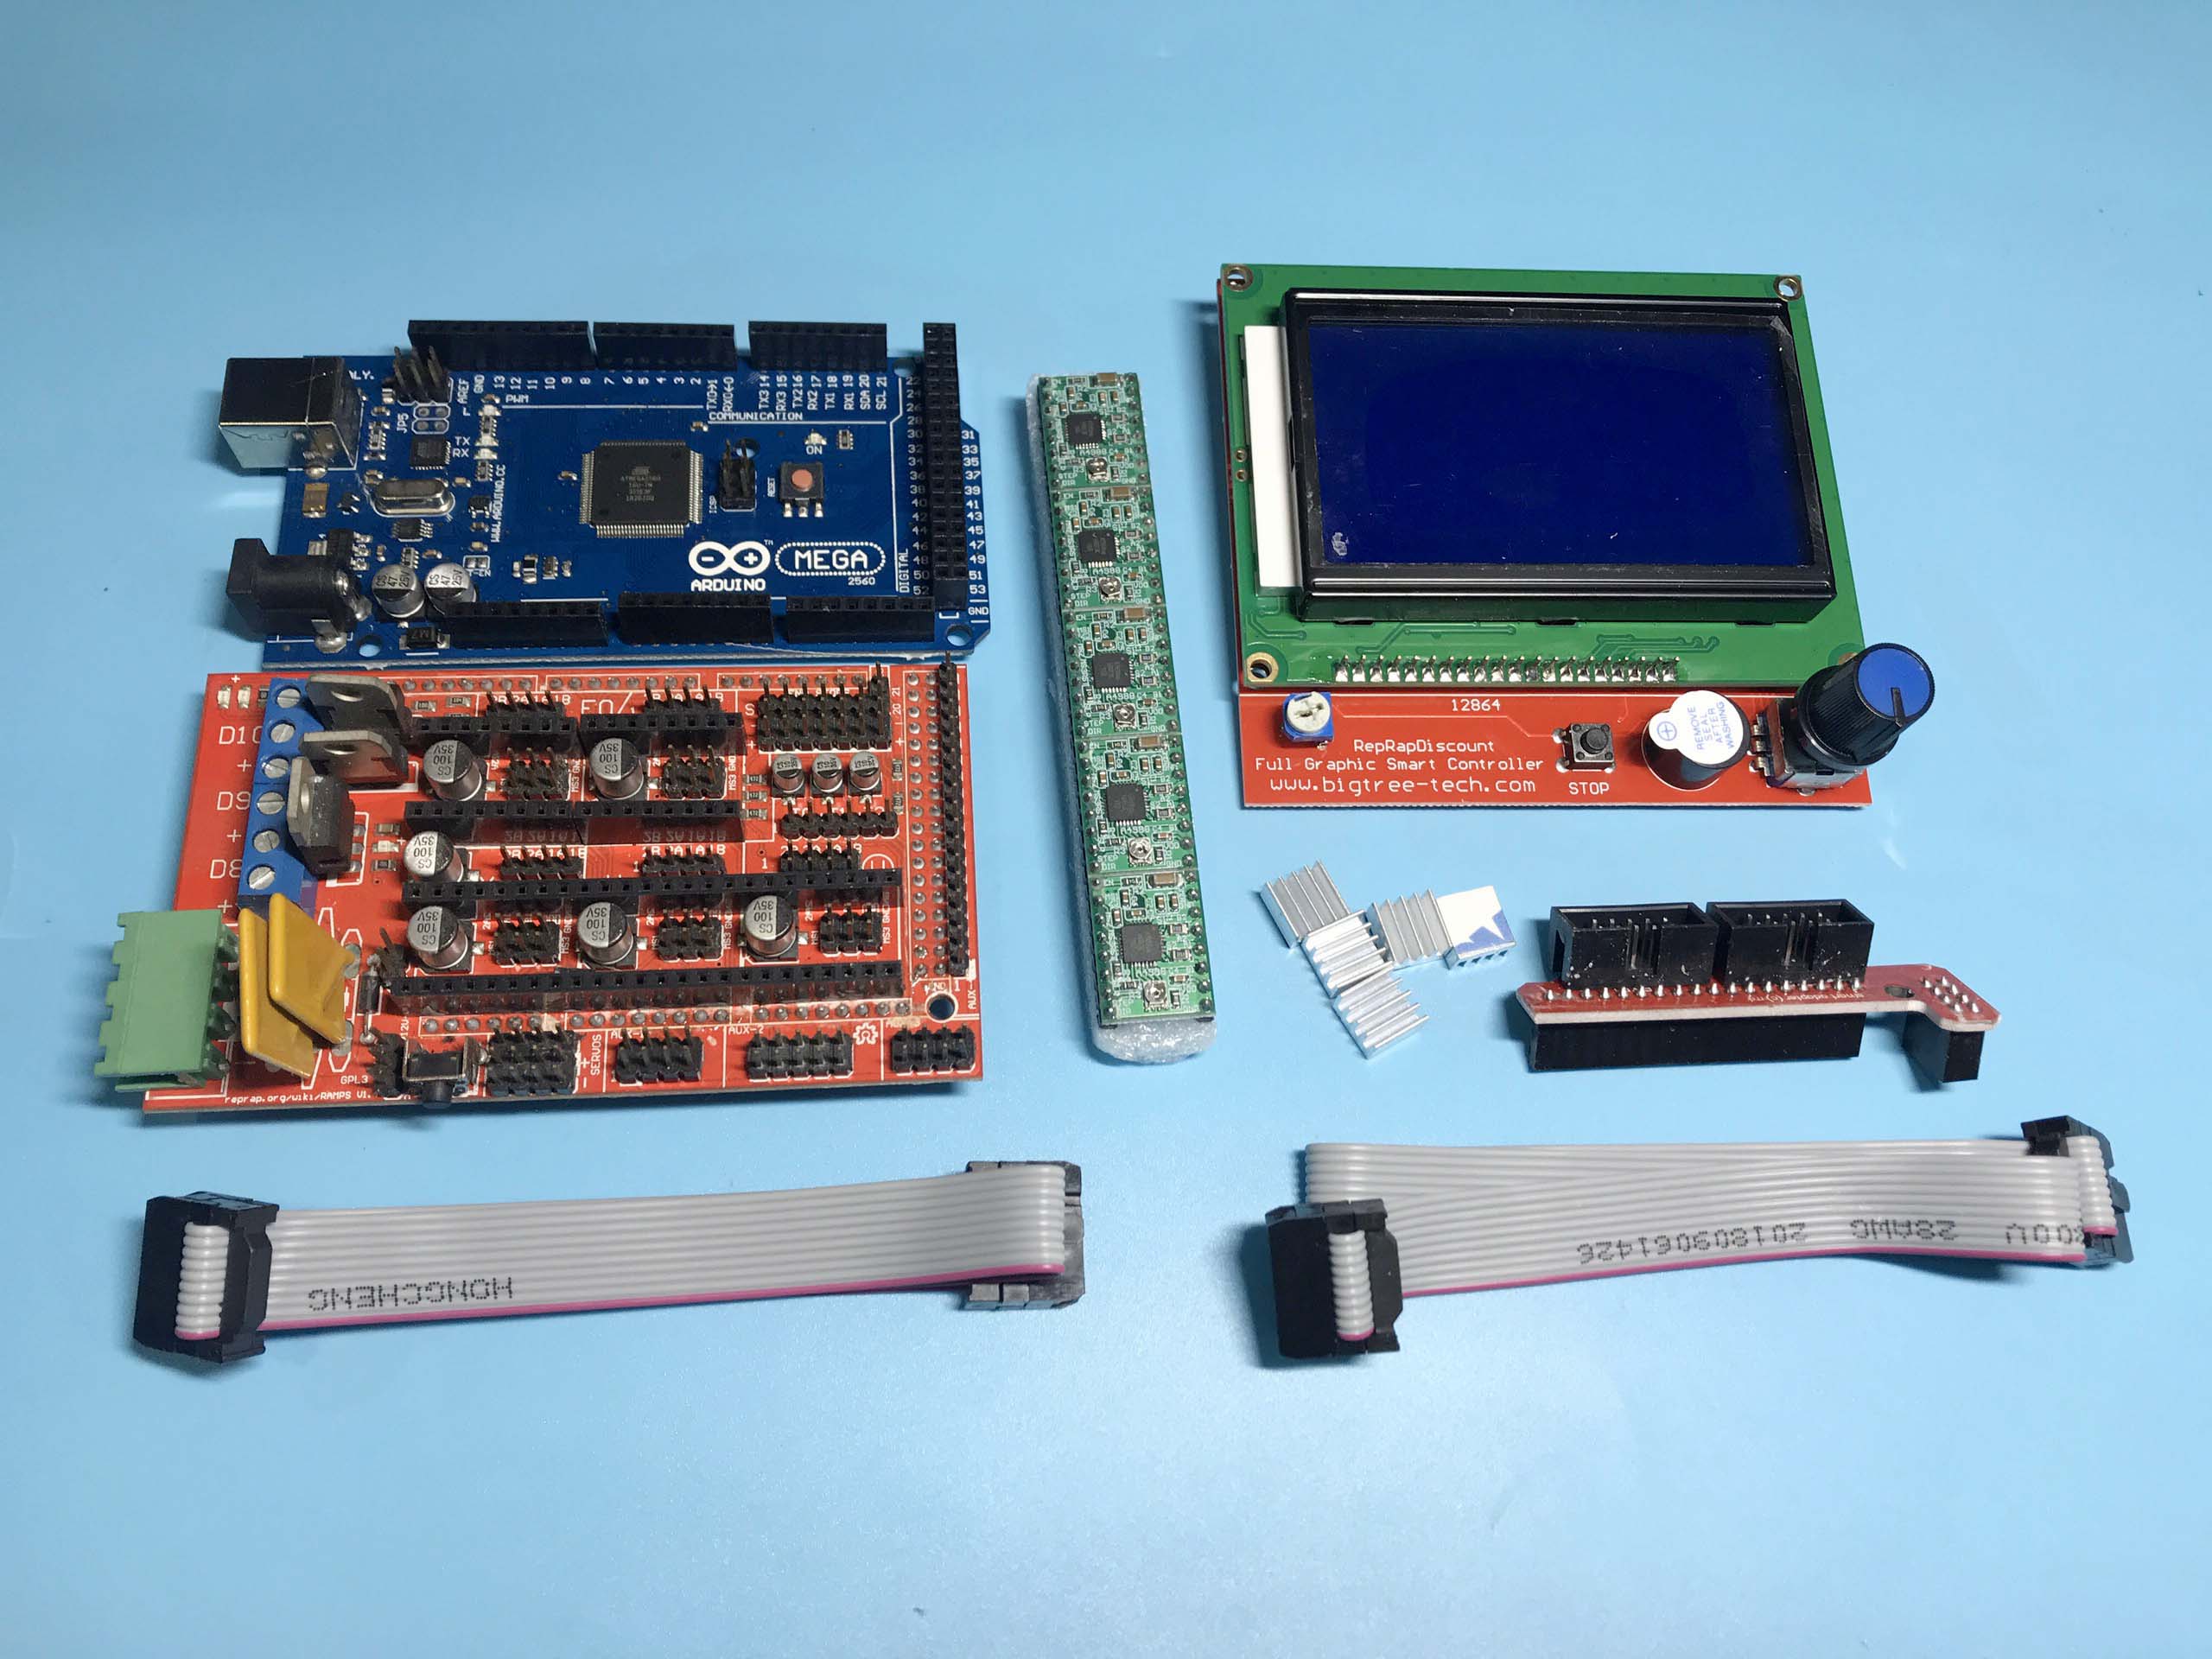 bo-dieu-khien-may-in-3d-ramps1-4-lcd-12864